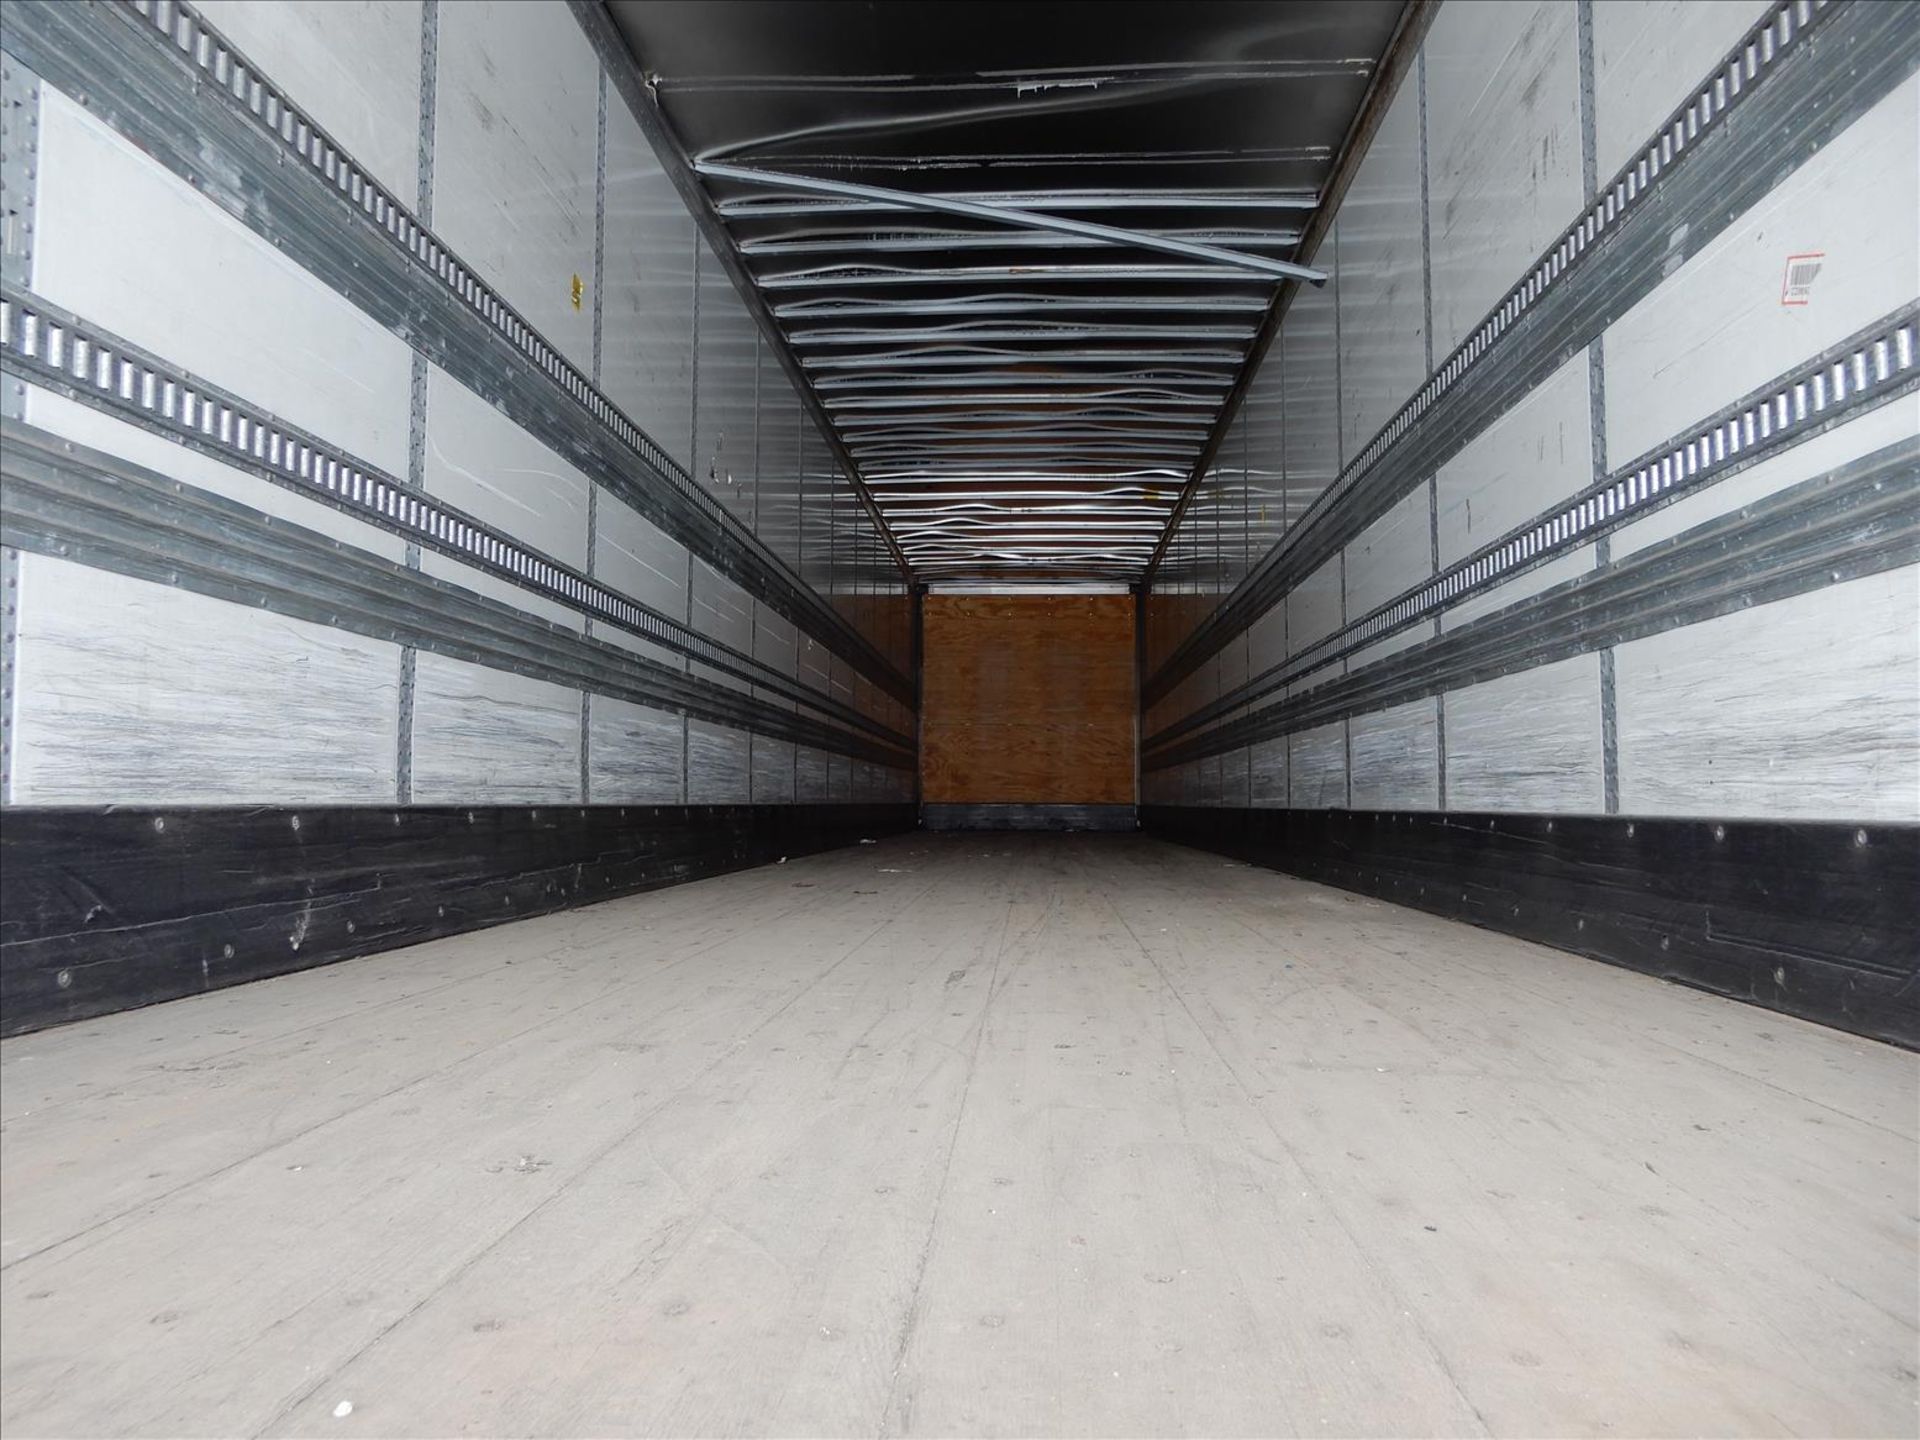 2012 Stoughton Trailer - Located in Indianapolis, IN - Image 19 of 27